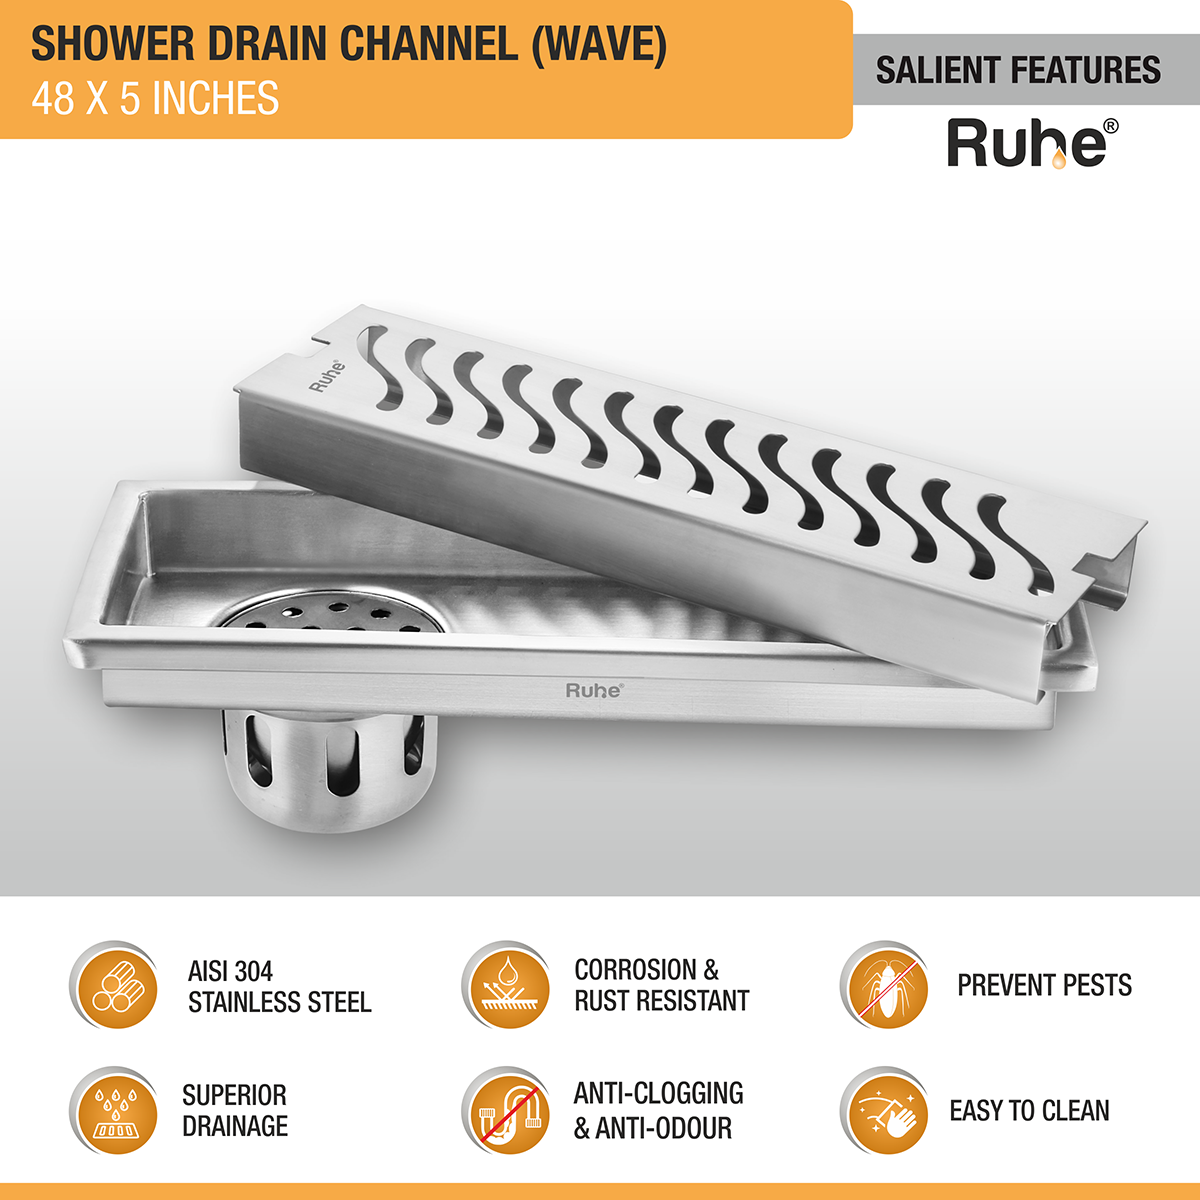 Wave Shower Drain Channel (48 X 5 Inches) with Cockroach Trap (304 Grade) features